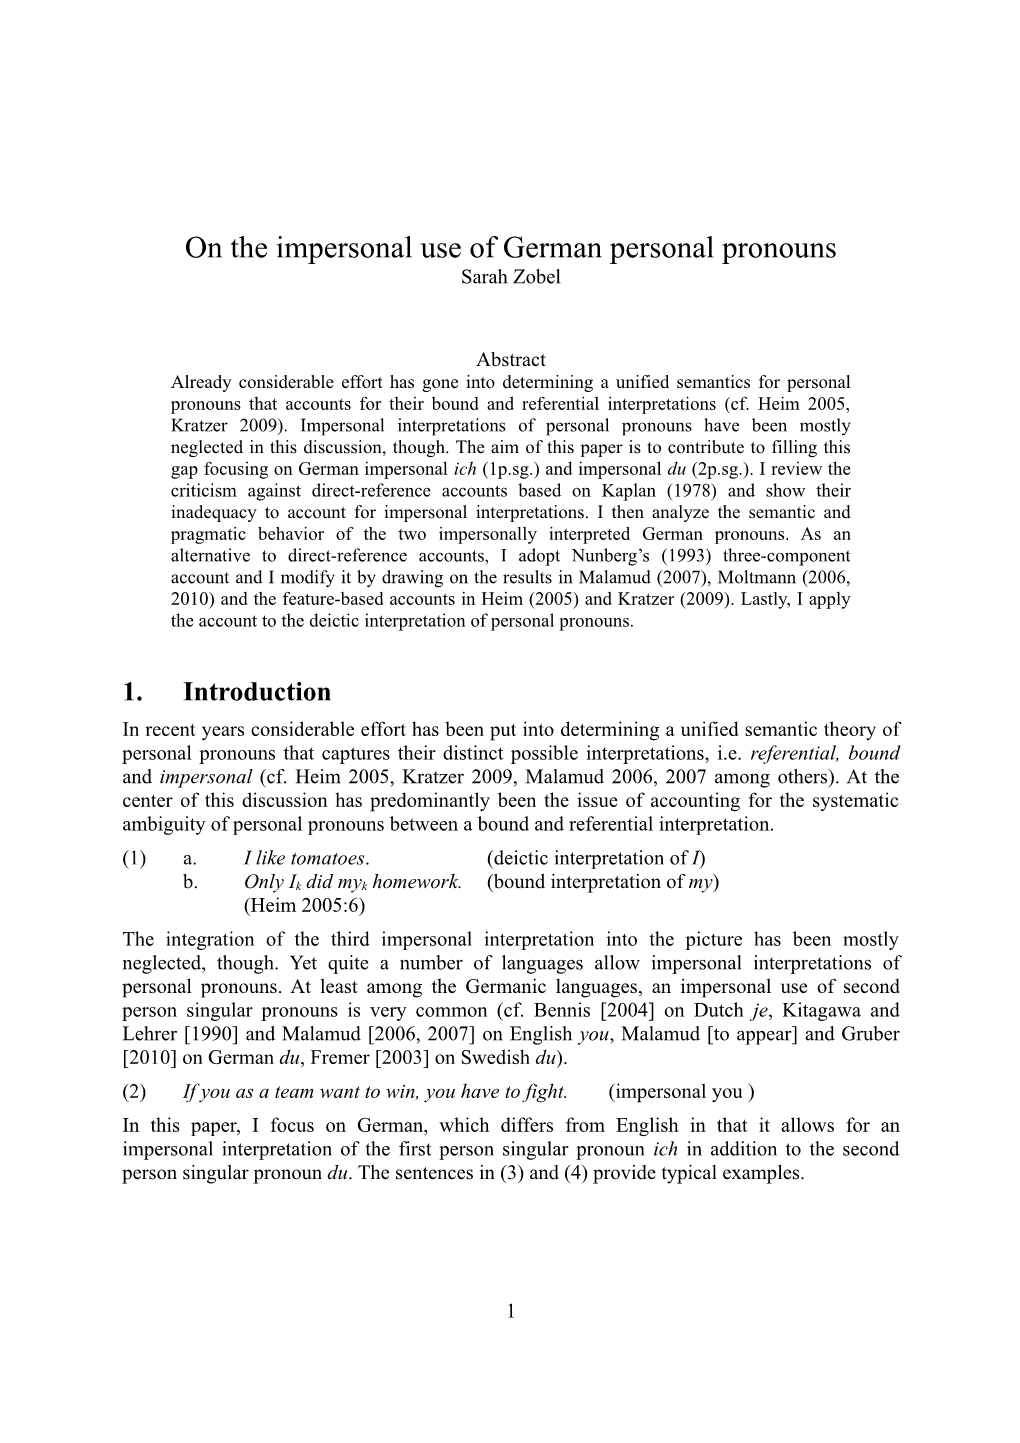 On the Impersonal Use of German Personal Pronouns Sarah Zobel